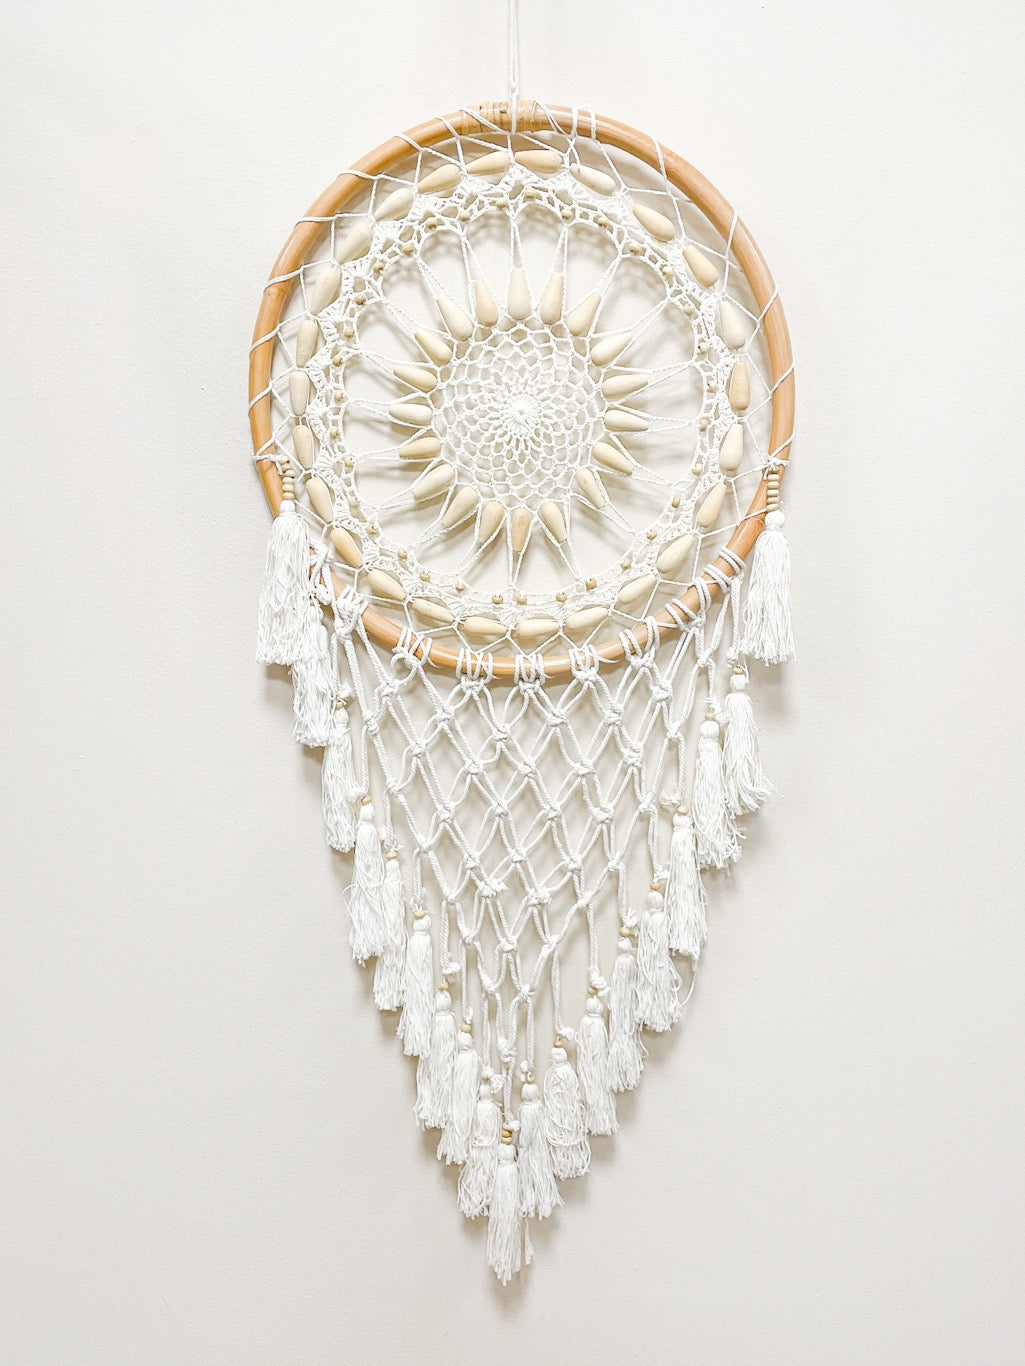 Dreamcatcher with wooden beads - 43cm diameter - various colours